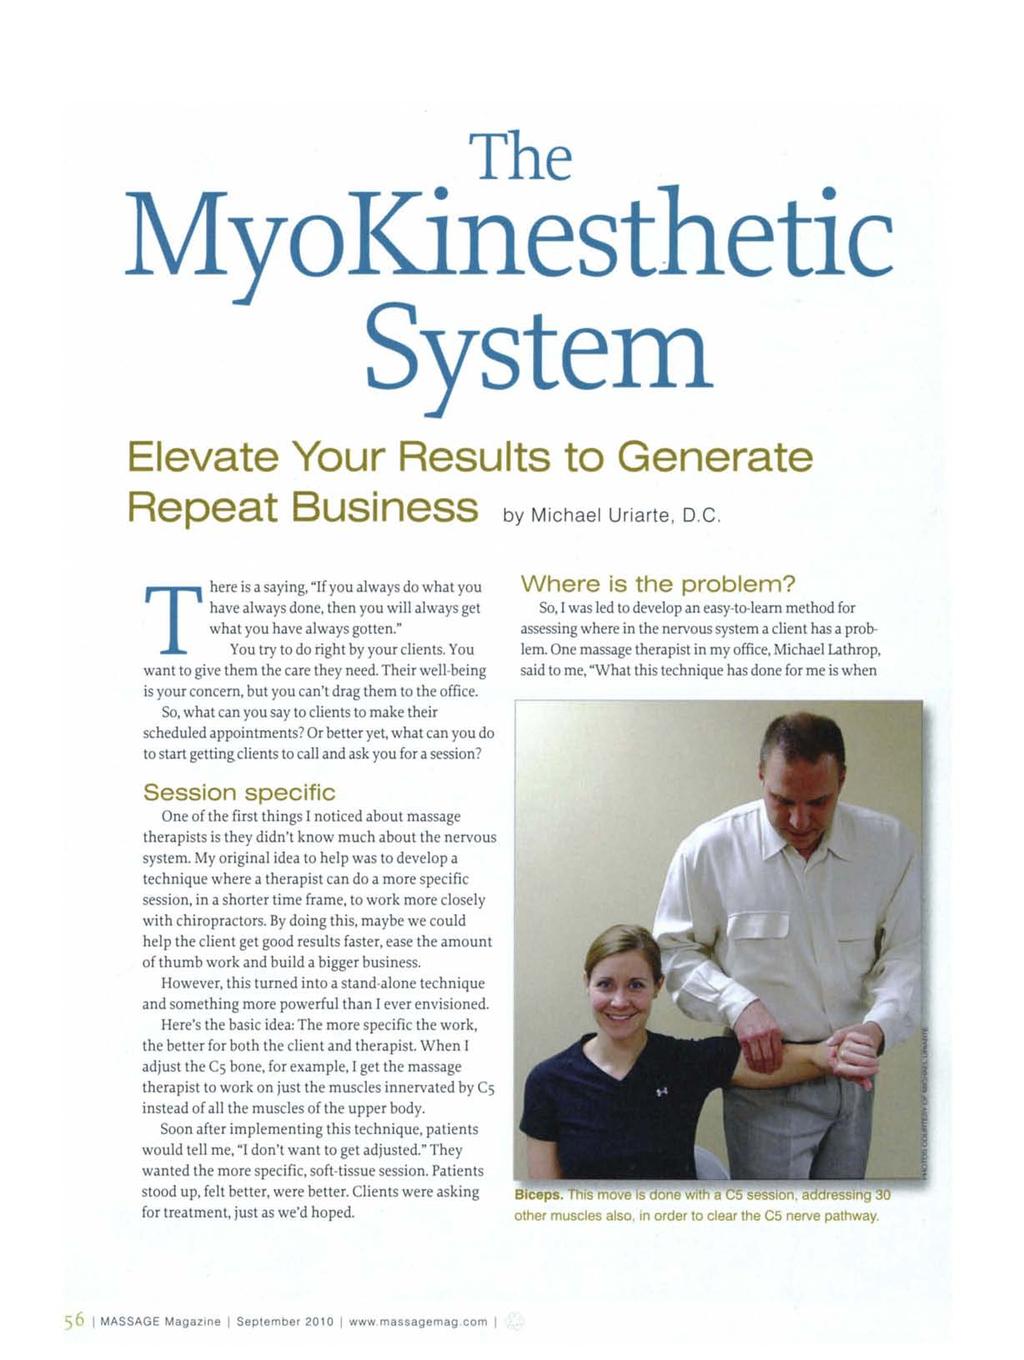 The MyoKinesthetic System Elevate Your Results to Generate Repeat Business by Michael Uriarte, D.C.